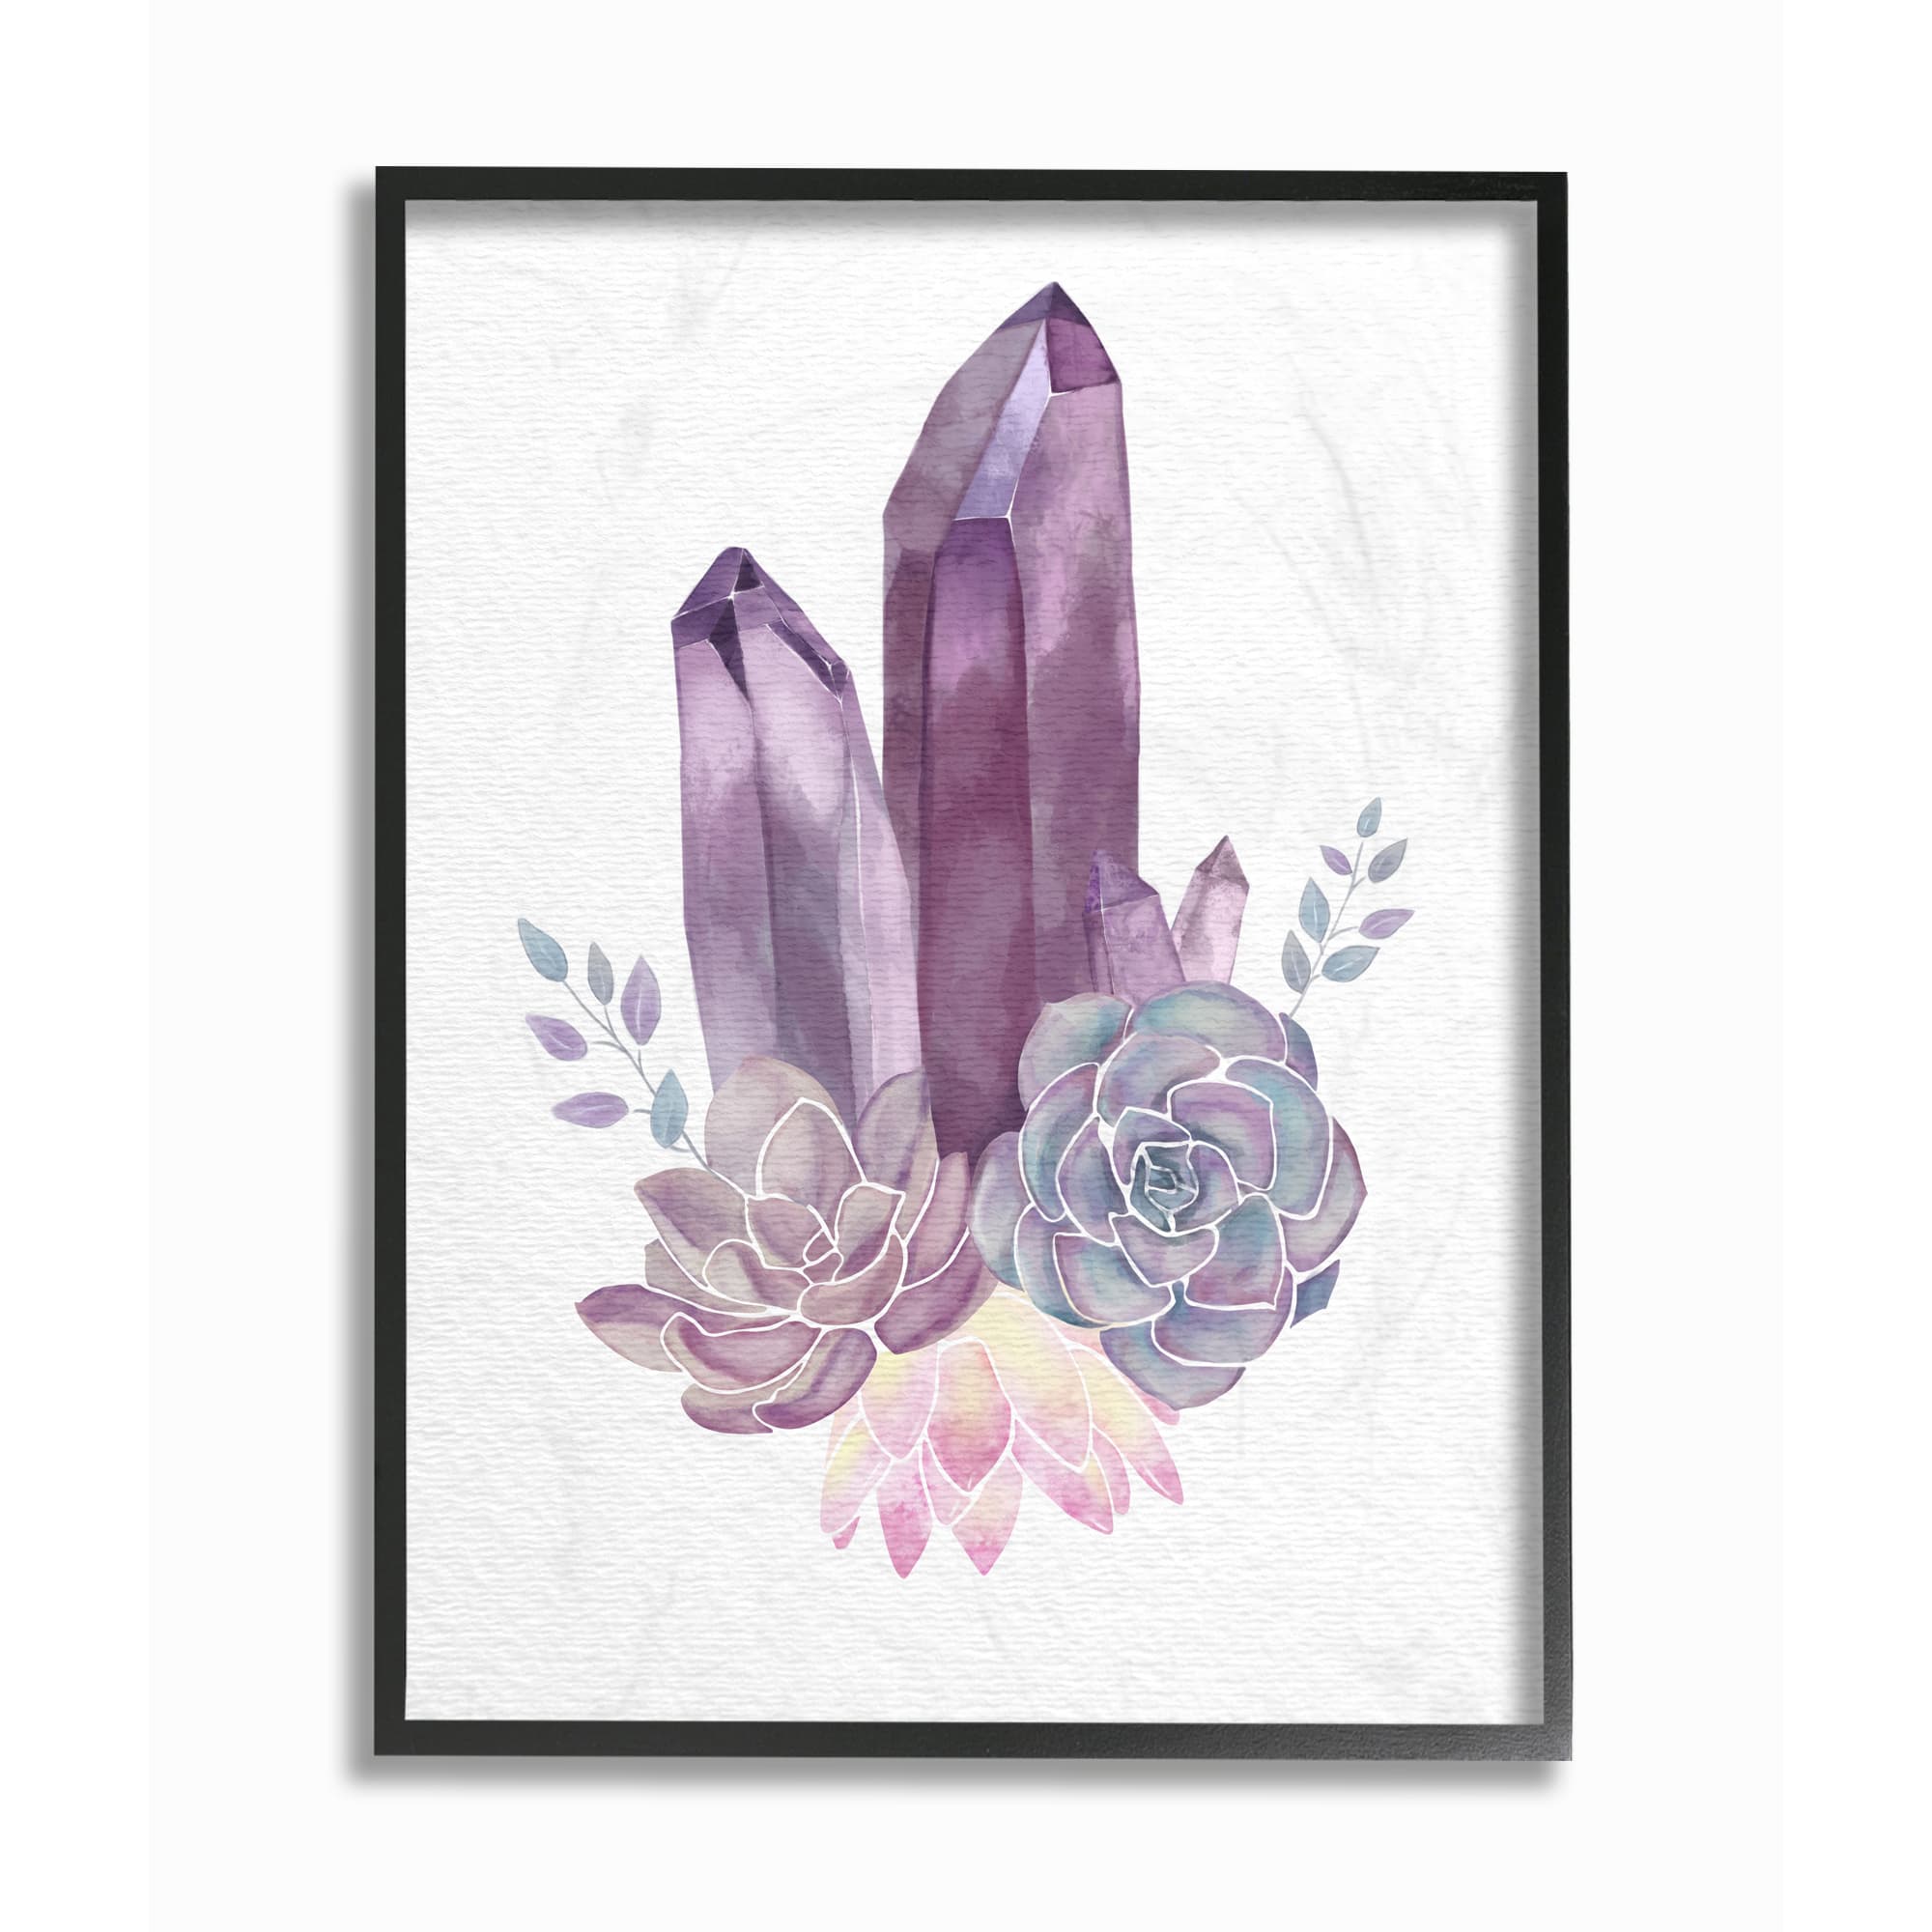 Stupell Industries Succulent Crystal Flower Purple Blue Watercolor Painting in Black Frame Wall Art